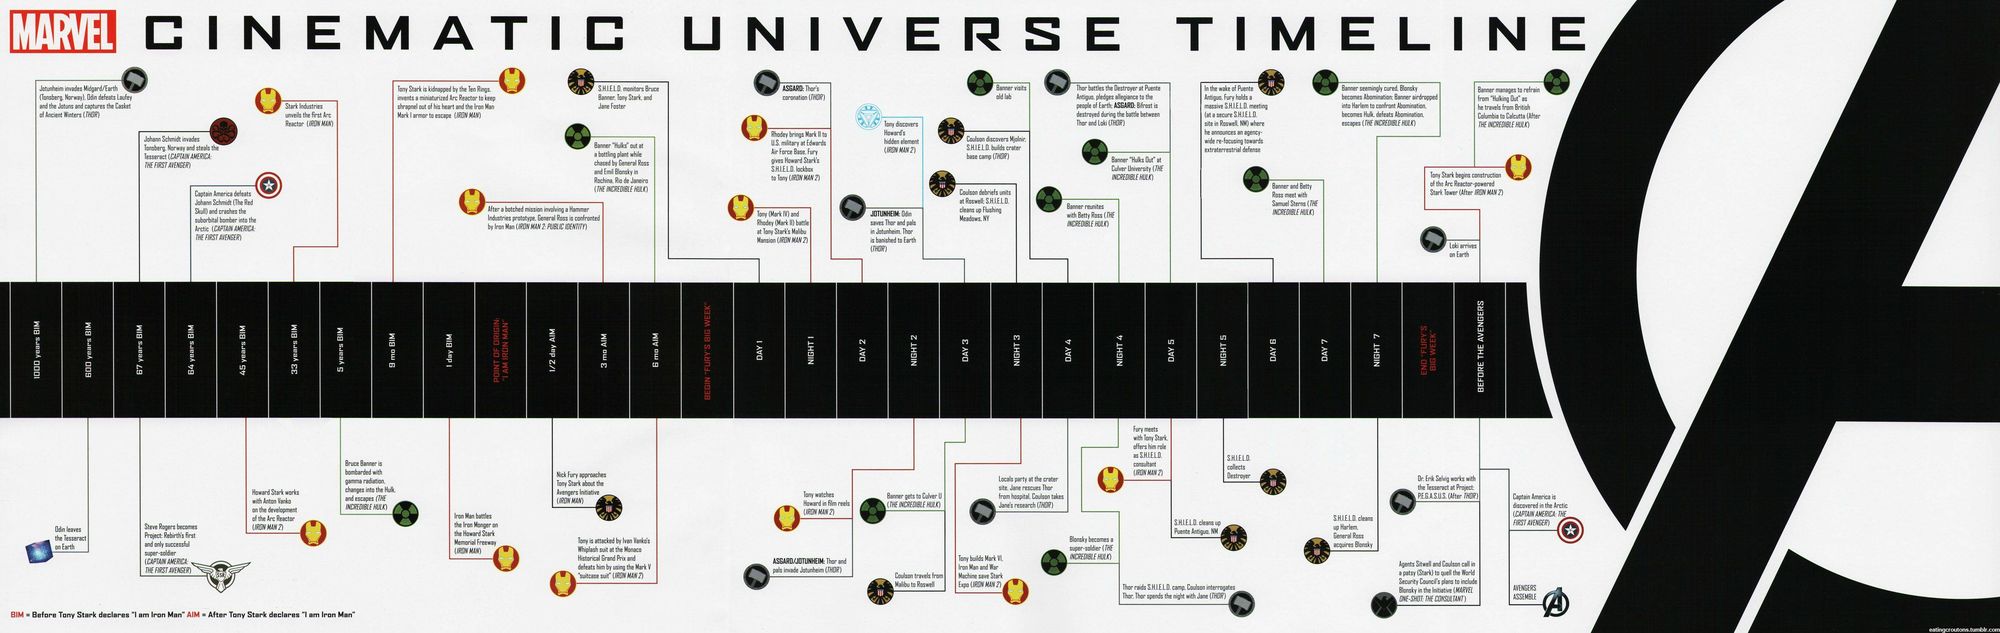 Even movies require timelines now.